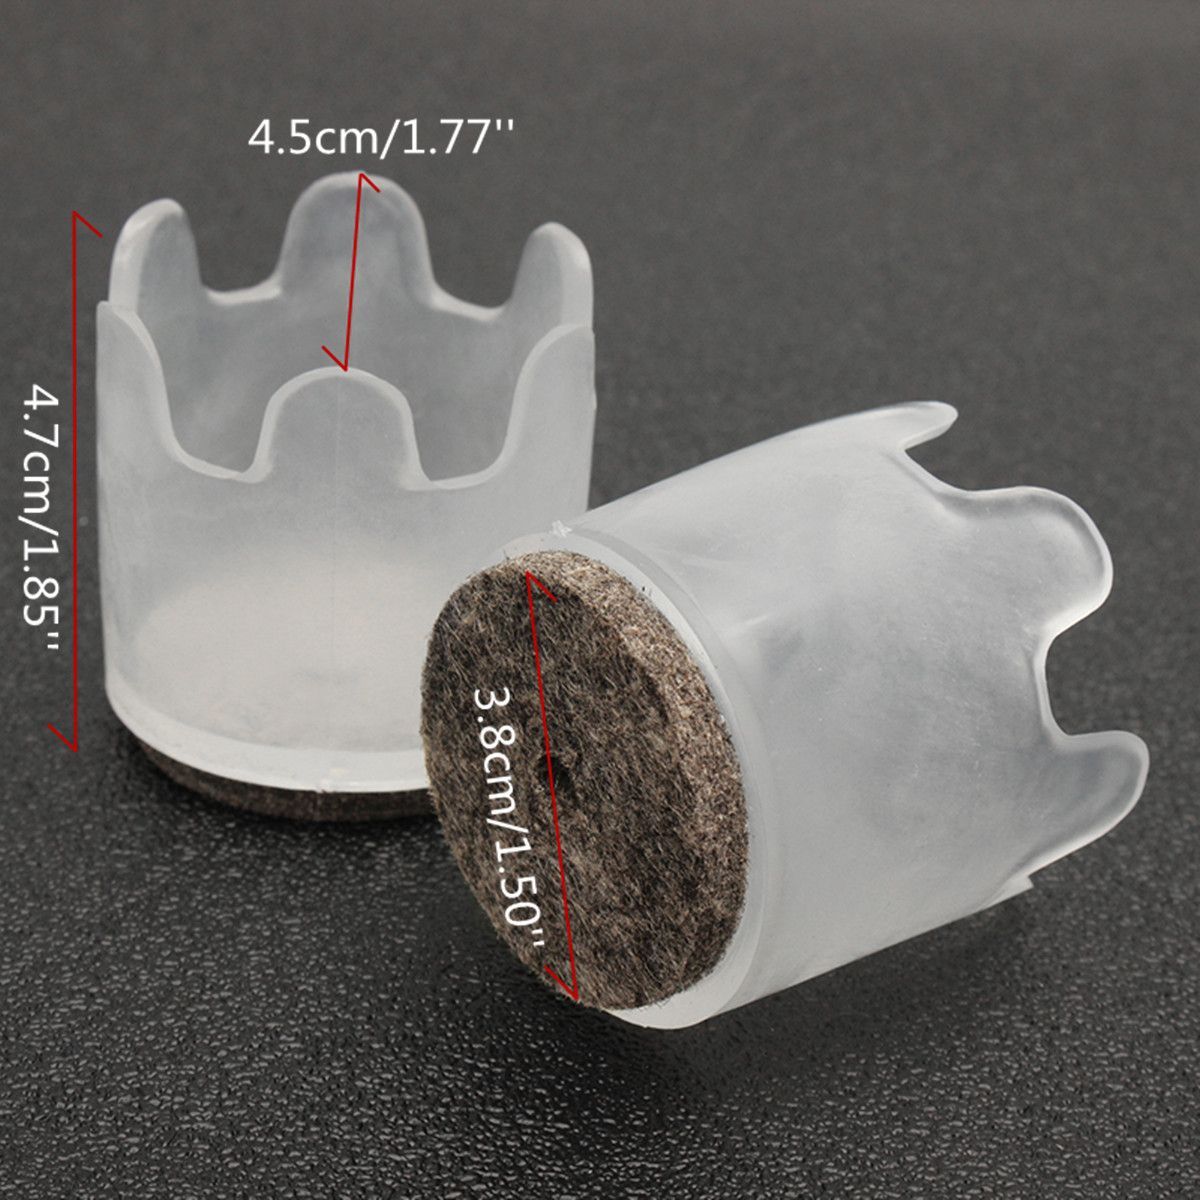 8pcsset-Silicone-Chair-Leg-Cap-Feet-Pads-Floor-Protectors-Furniture-Table-1588605